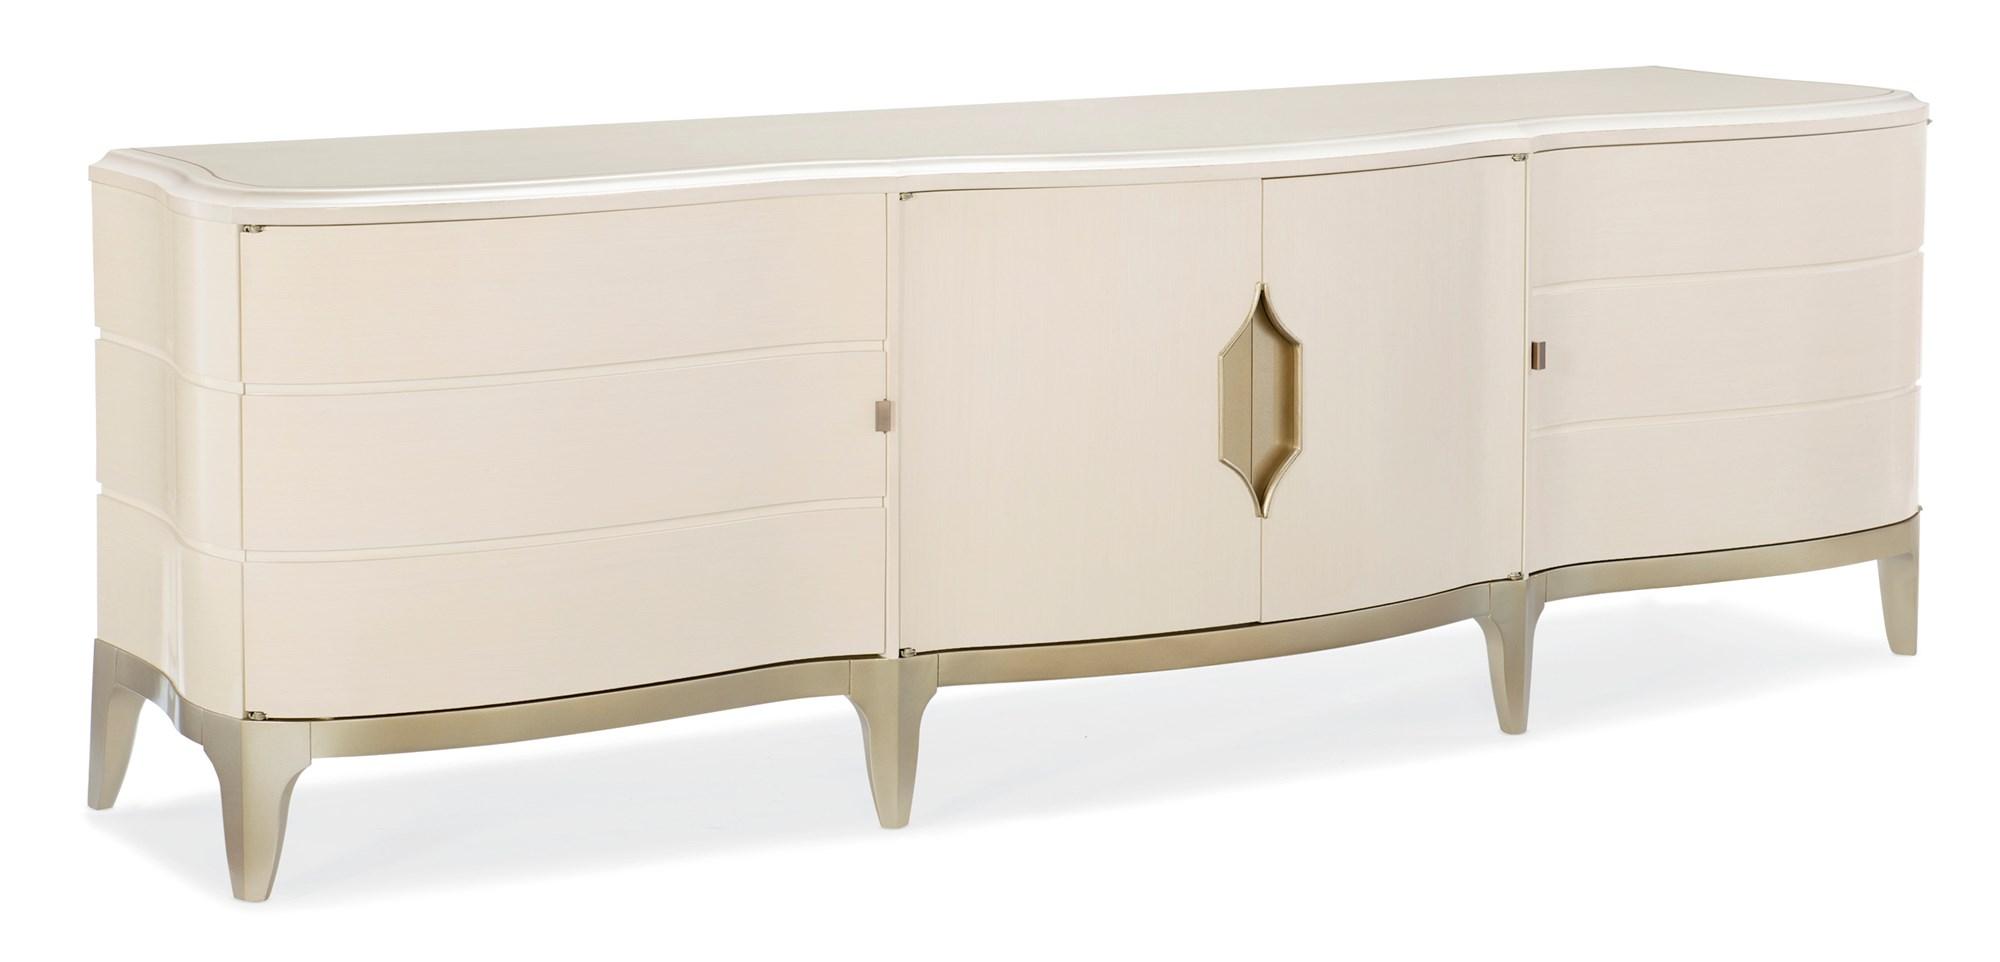 Contemporary Media Cabinet ADELA MEDIA CABINET C011-016-531 in Off-White, Taupe 